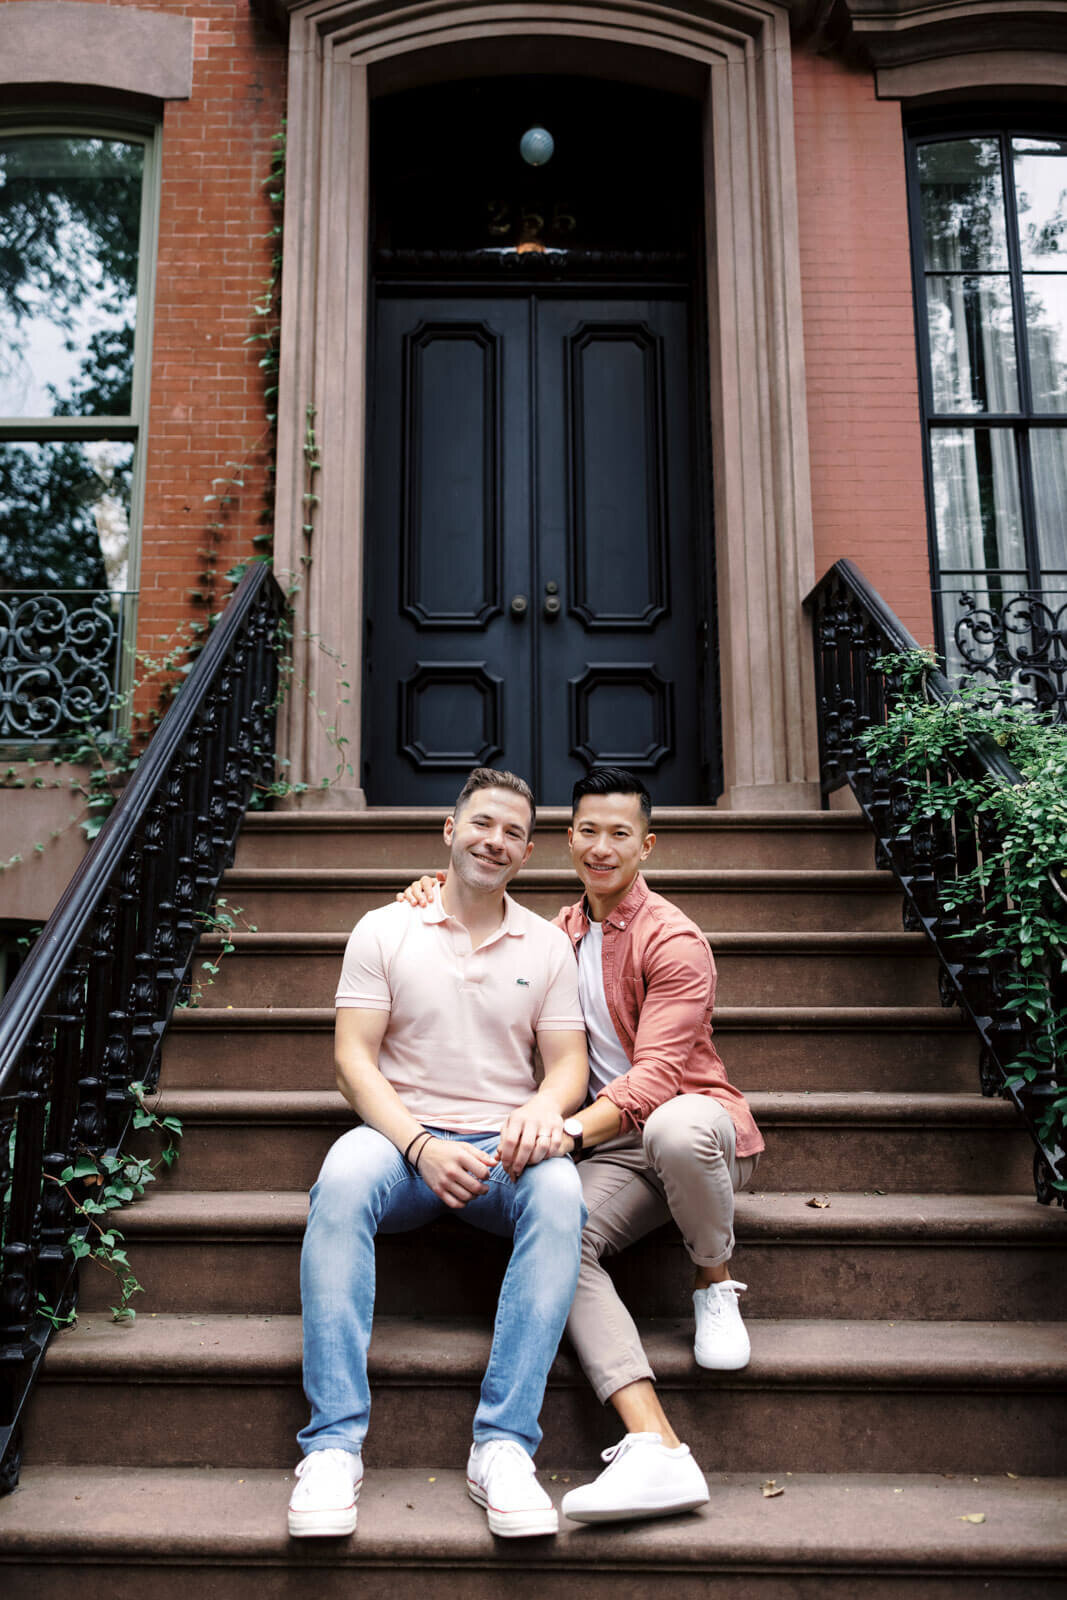 The engaged couple is sitting in an entrance staircase of an ivy-covered building at West Village, NYC. Image by Jenny Fu Studio.